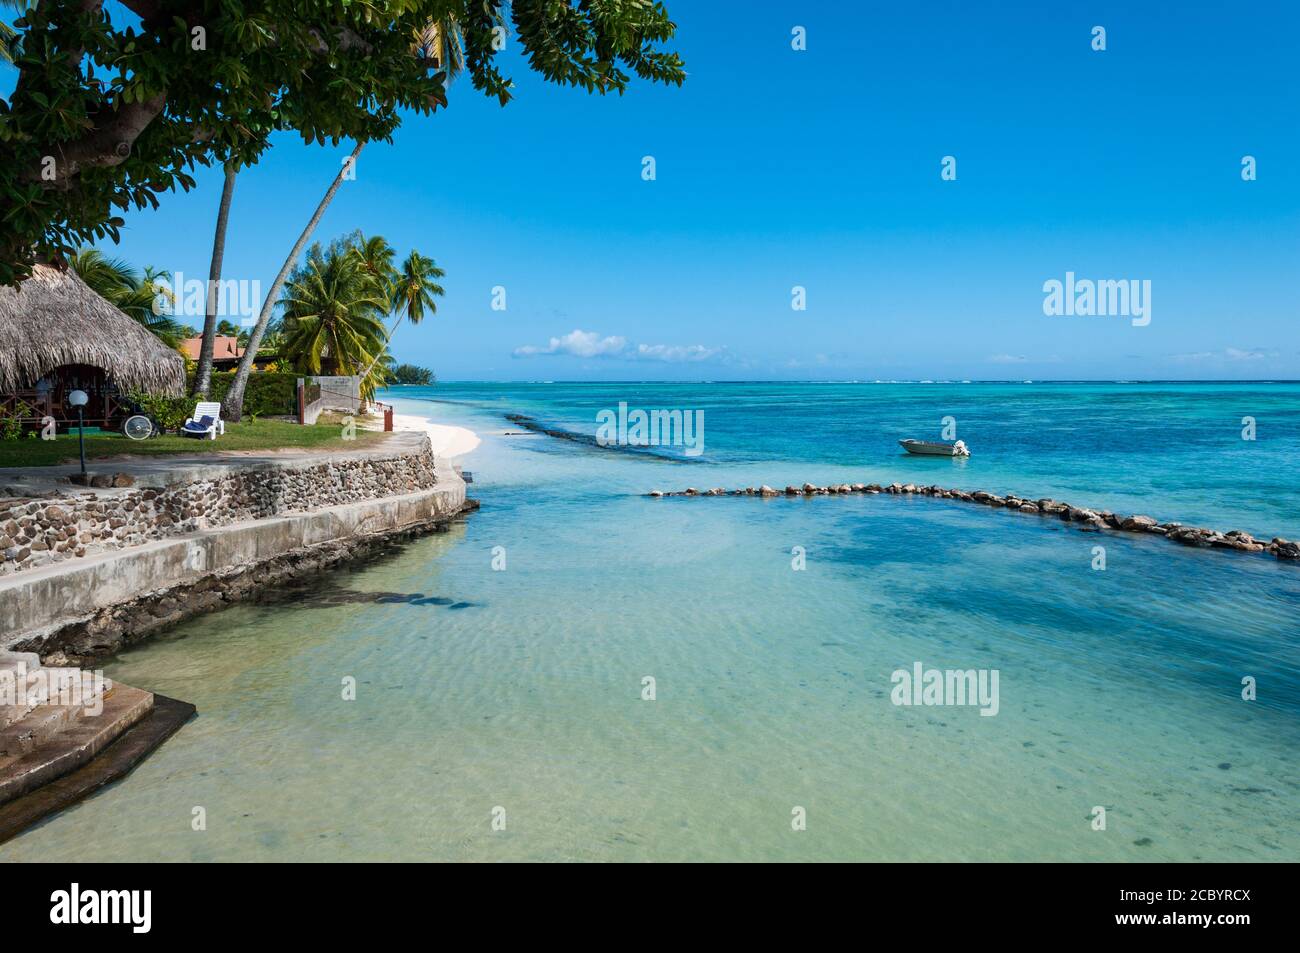 A seaside bungalows resort in Moorea. Paradisiac beach with an empty boat in the distance. Stock Photo